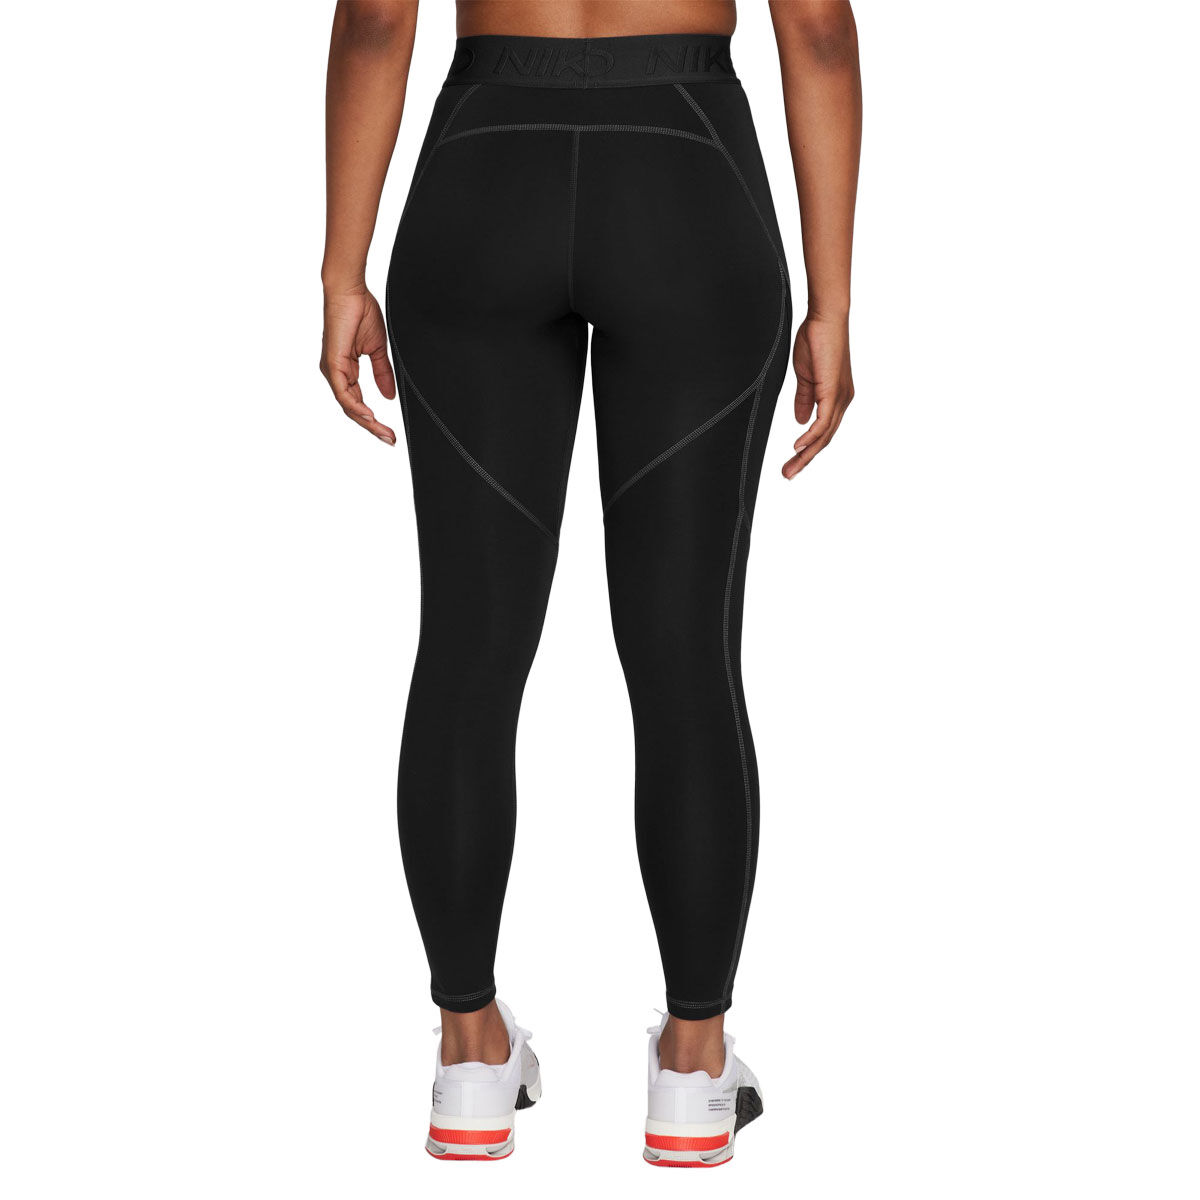 Nike Women's Compression Clothing, Tights & Shorts